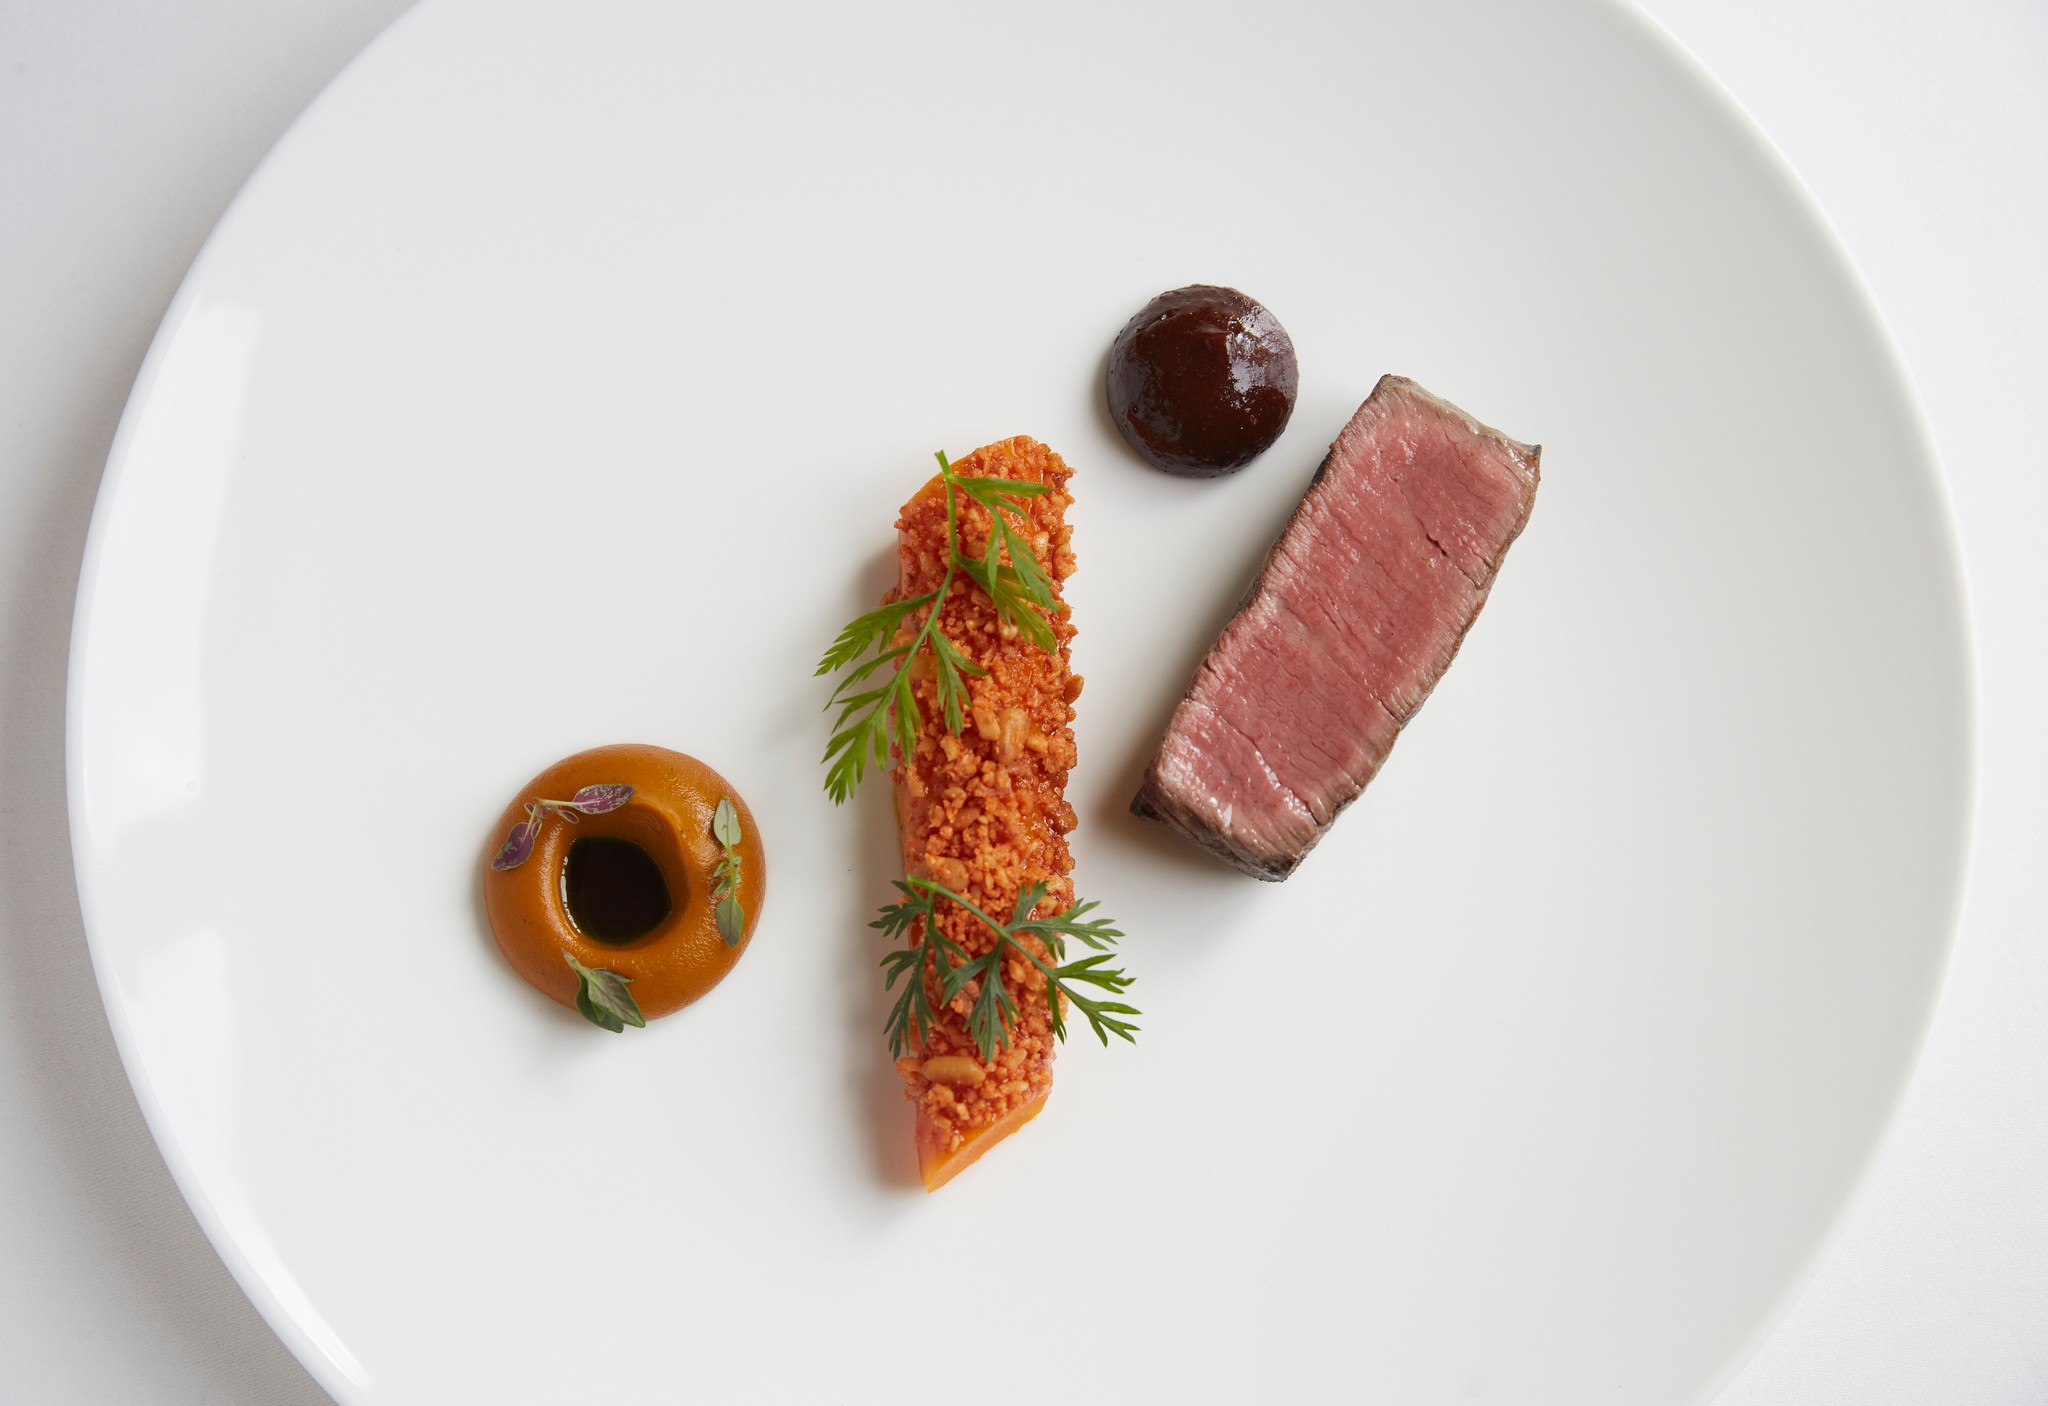 Overhead shot of Galloway beef and carrot dish from Marcus Belgravia